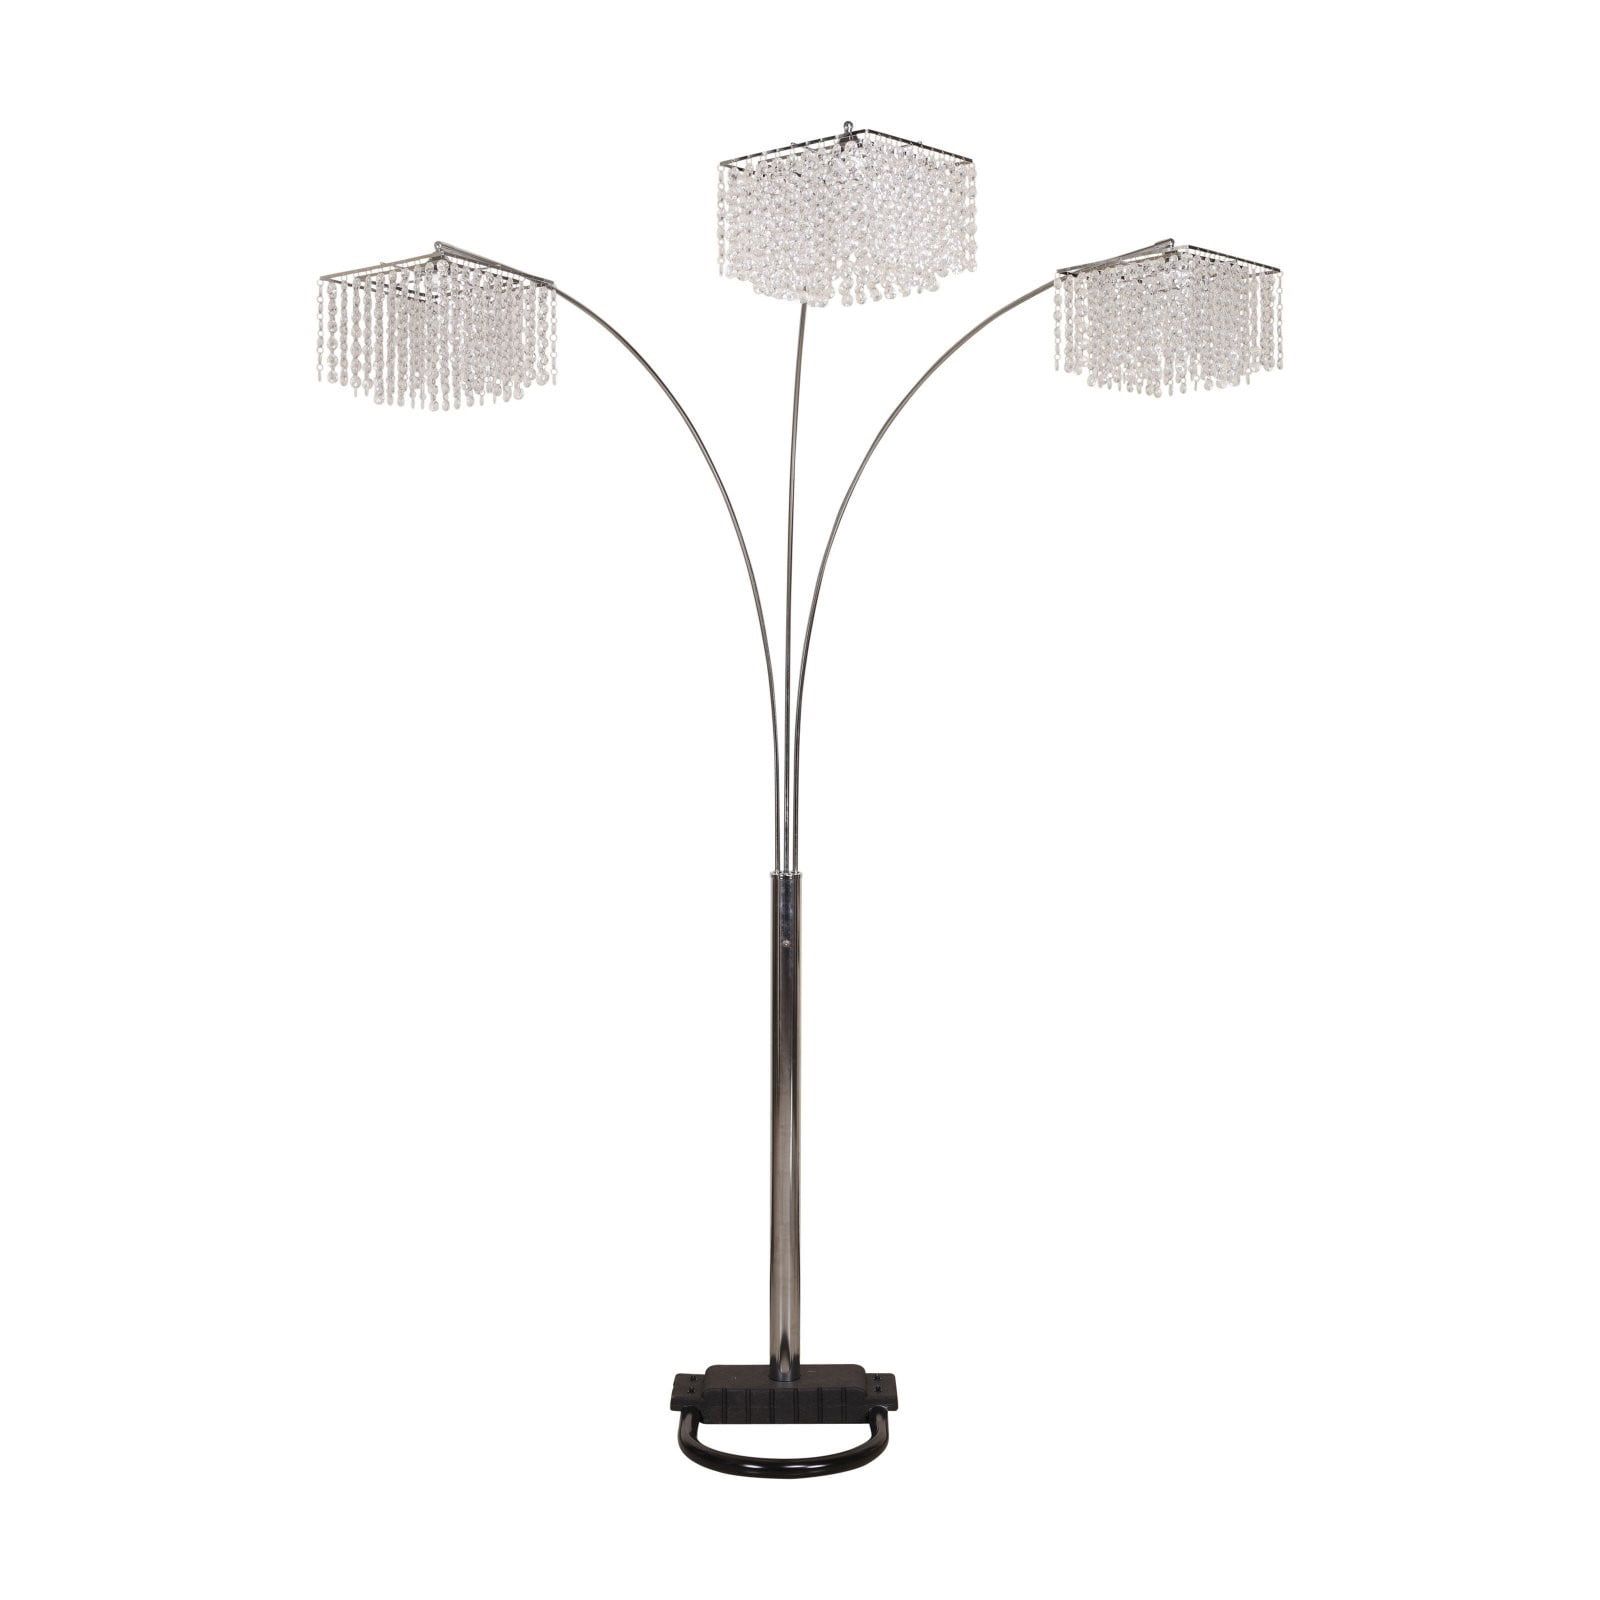 Crown Mark Chrome And Crystal Chandelier Table Lamp – Walmart Intended For Chandelier Style Floor Lamps (View 8 of 15)